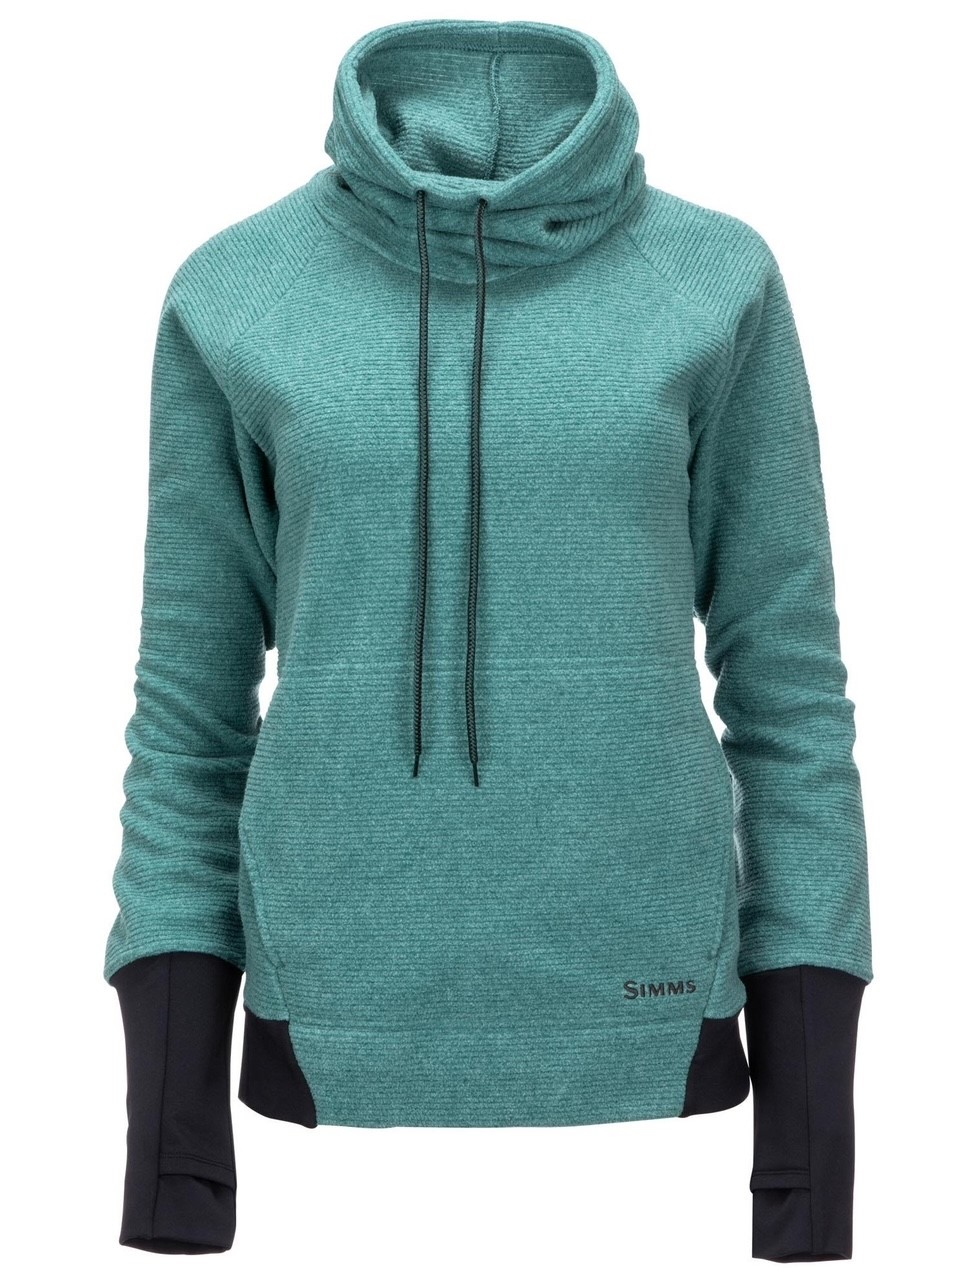 Simms W's Rivershed Hoody - Avalon Teal - Large